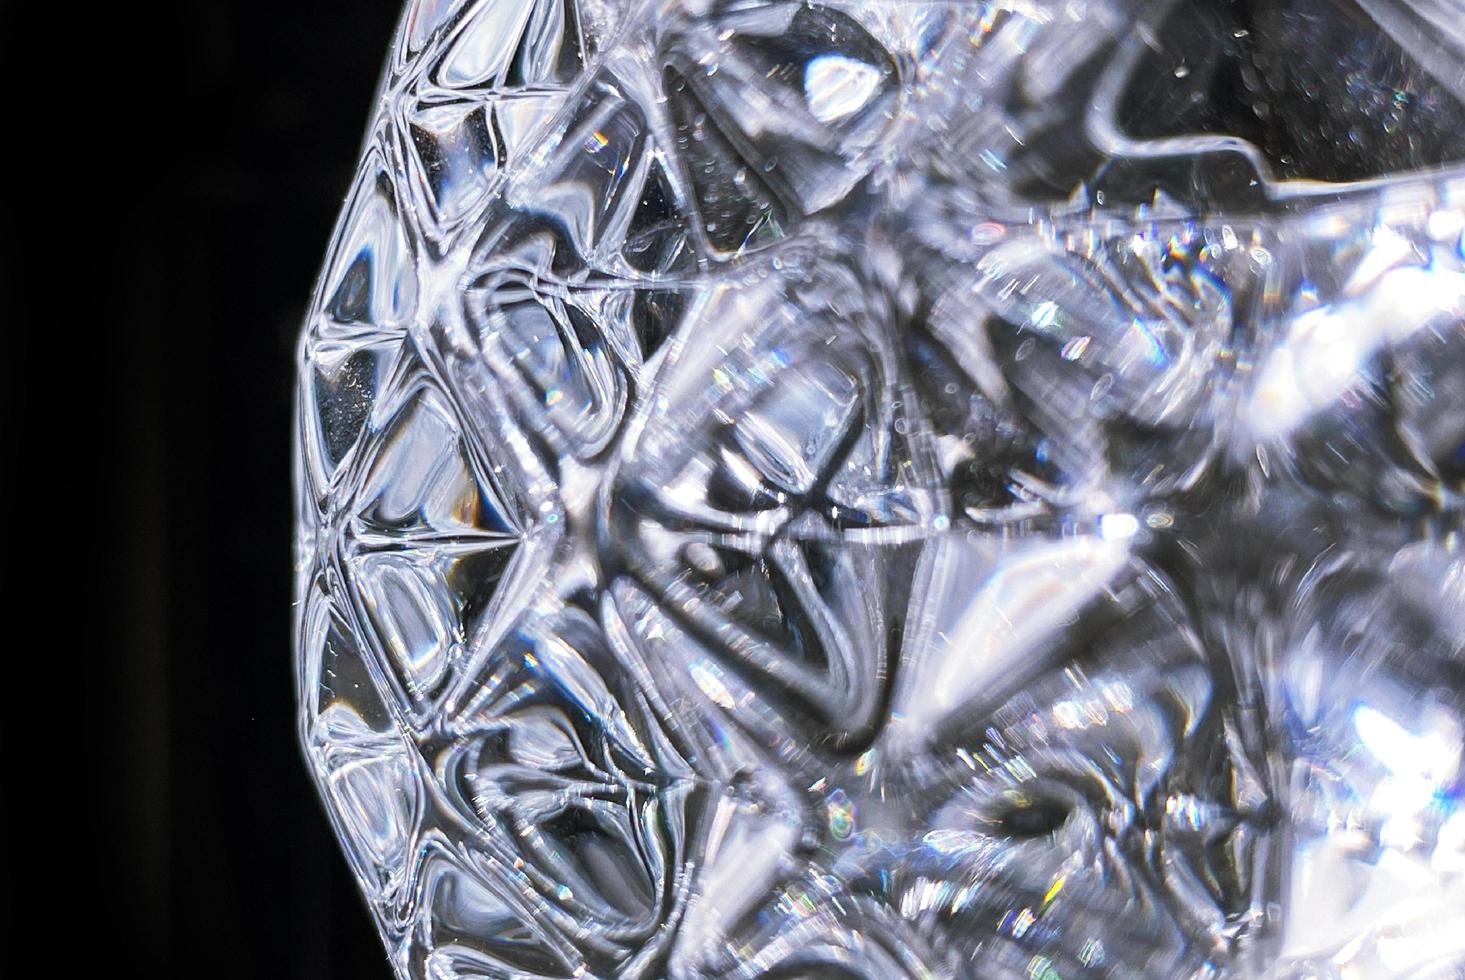 crystal texture closeup showing the shining and luxurious impression. closeup view of a diamond ornament for creative design. photo